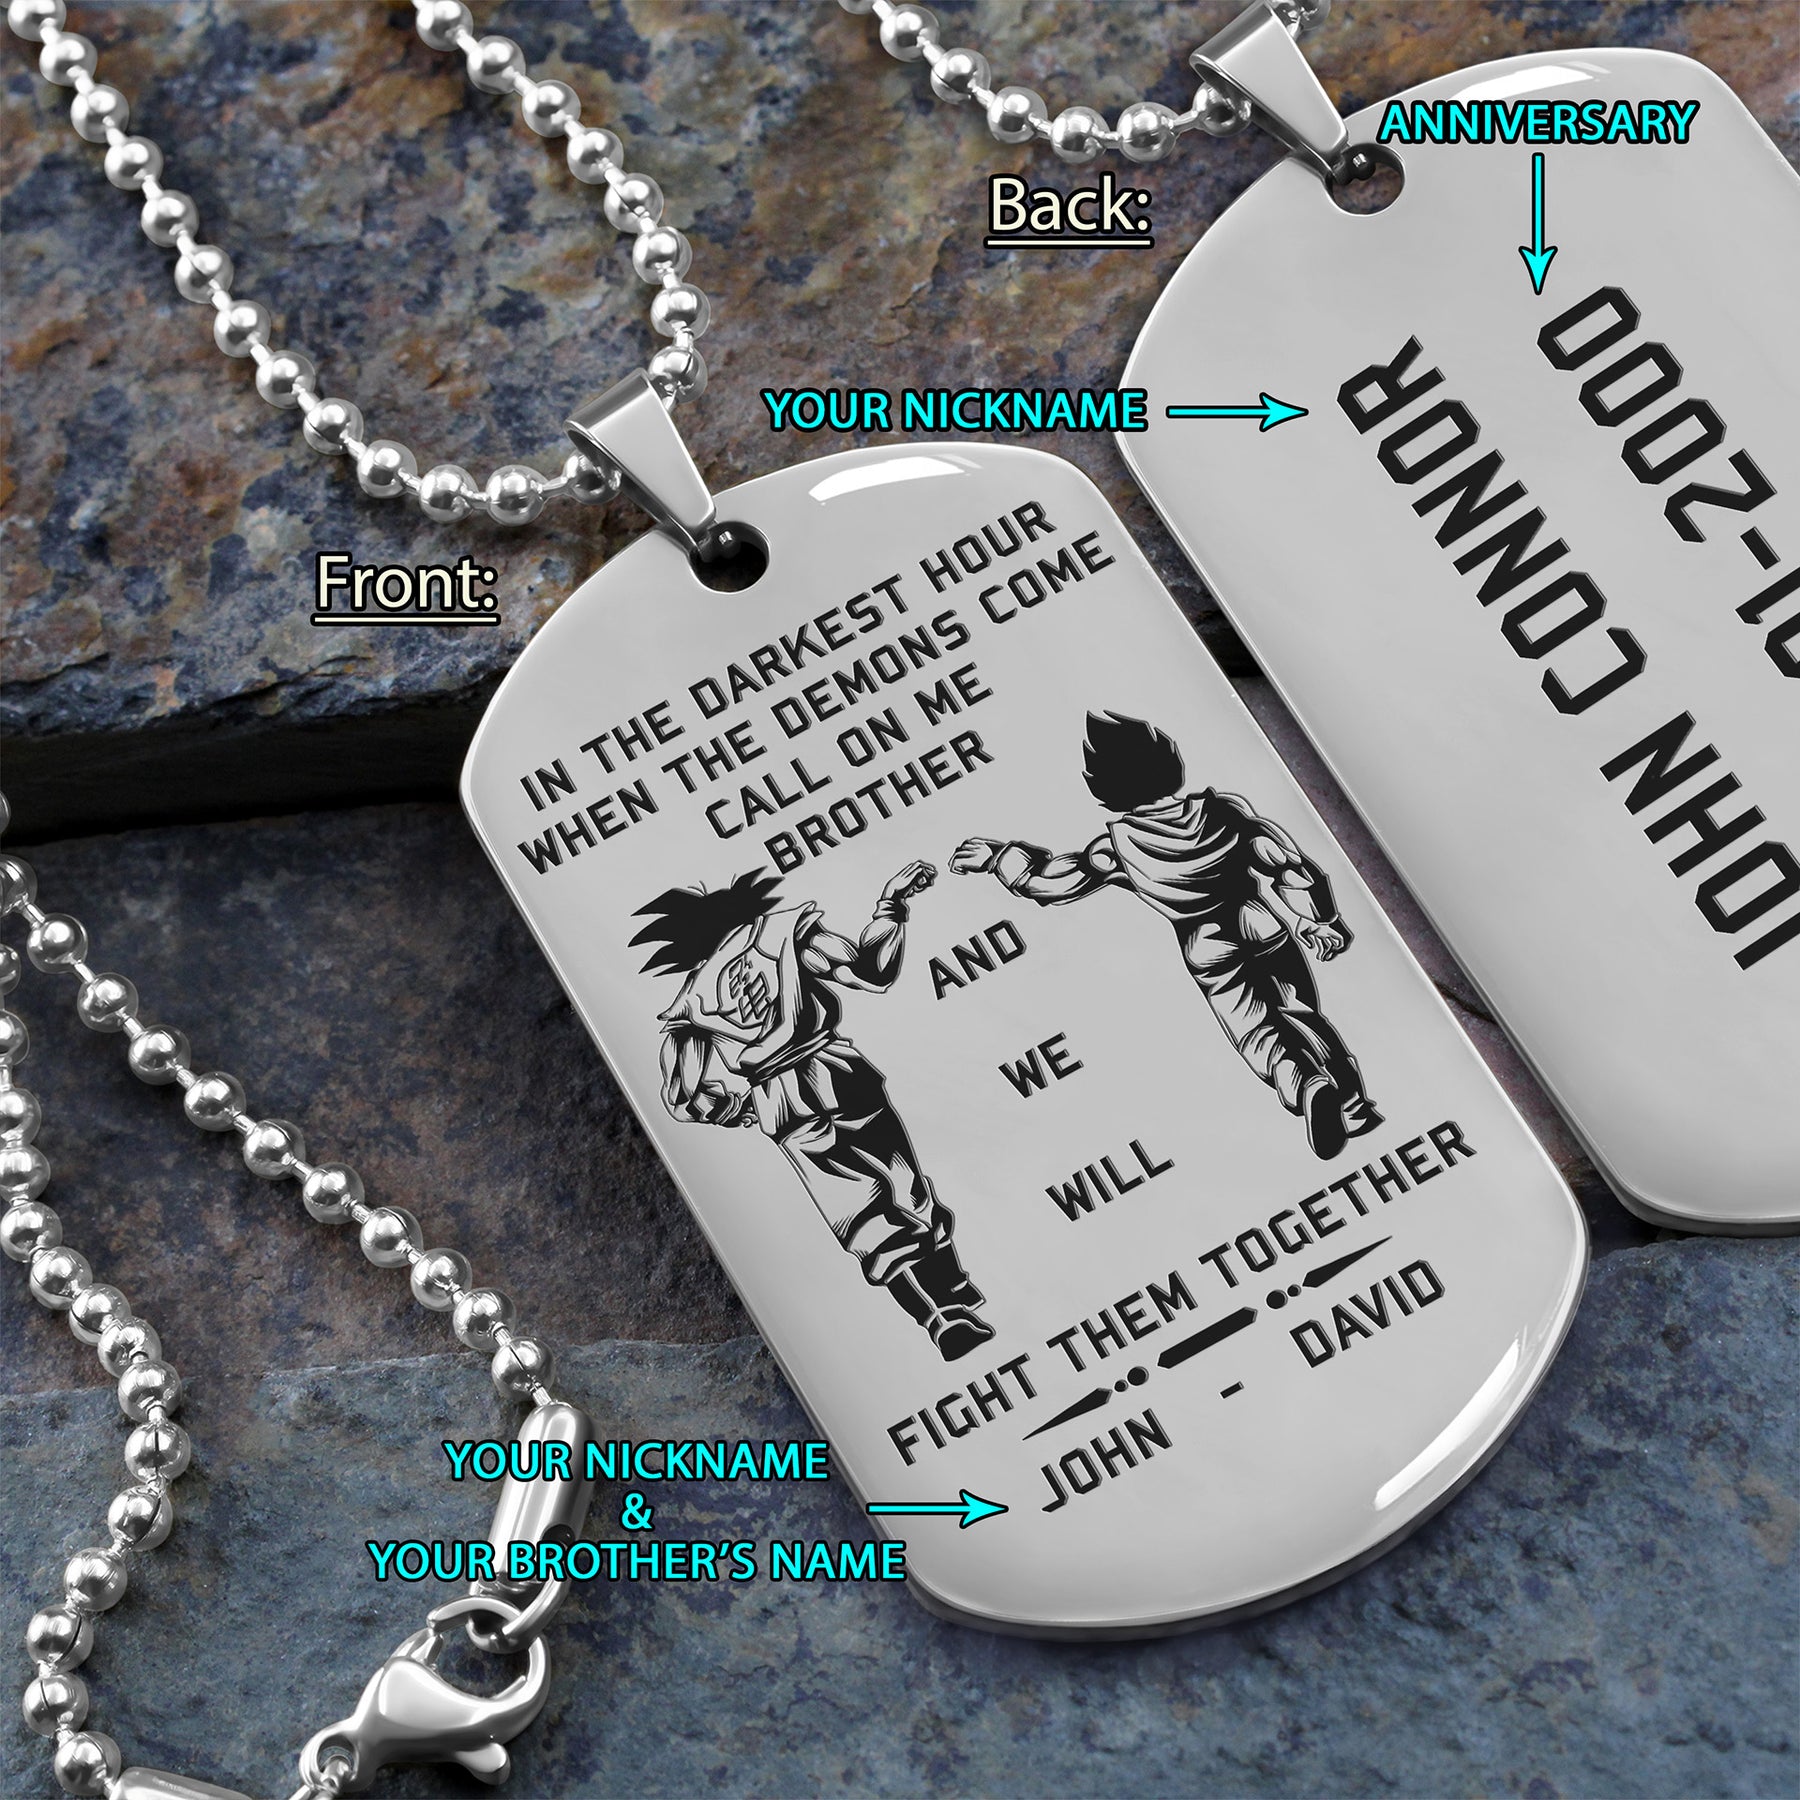 DRD010 - DRD013 - DRD024 - DRD025 - Call On Me Brother - It's Not Over When You Lose - It's Over When You Quit - Quitting Is Not - Goku - Vegeta - Super Saiyan Blue - Dragon Ball Dog Tag - Engrave Double Dog Tag